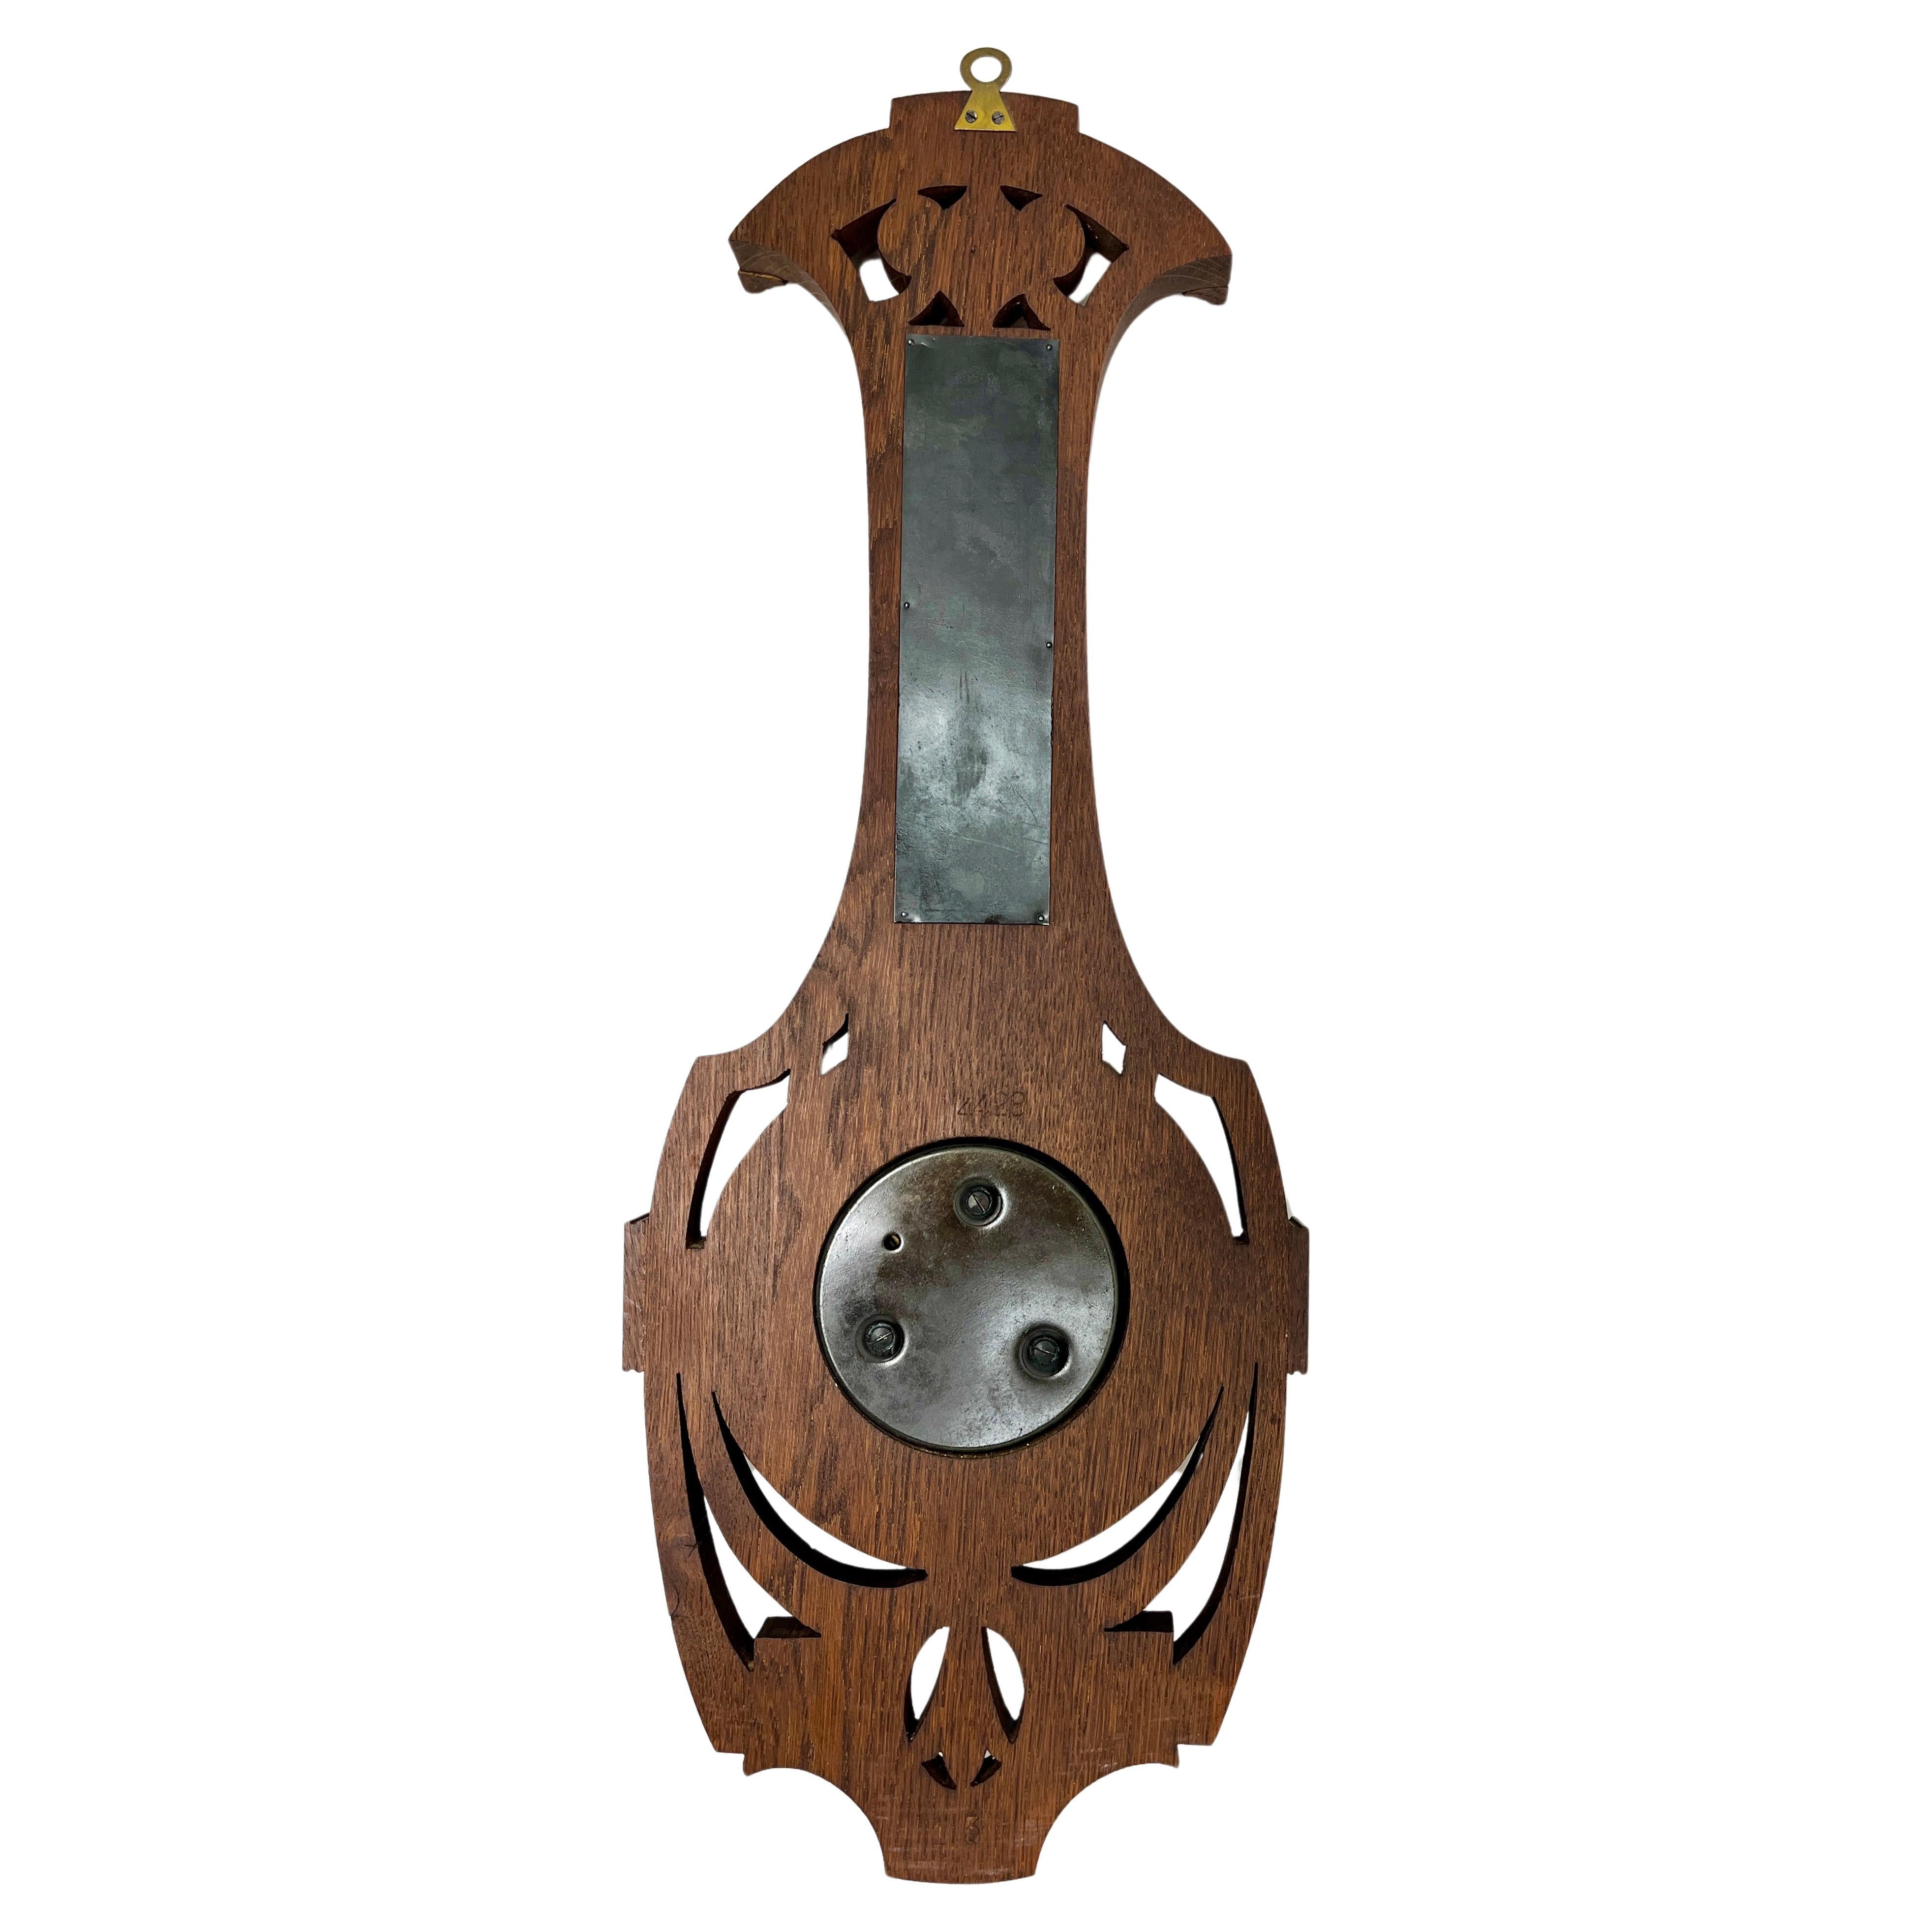 Early 20th Century Wall-Mounted Weather Station in Art Nouveau Style Carved Oak By R. Krengel 1910s For Sale